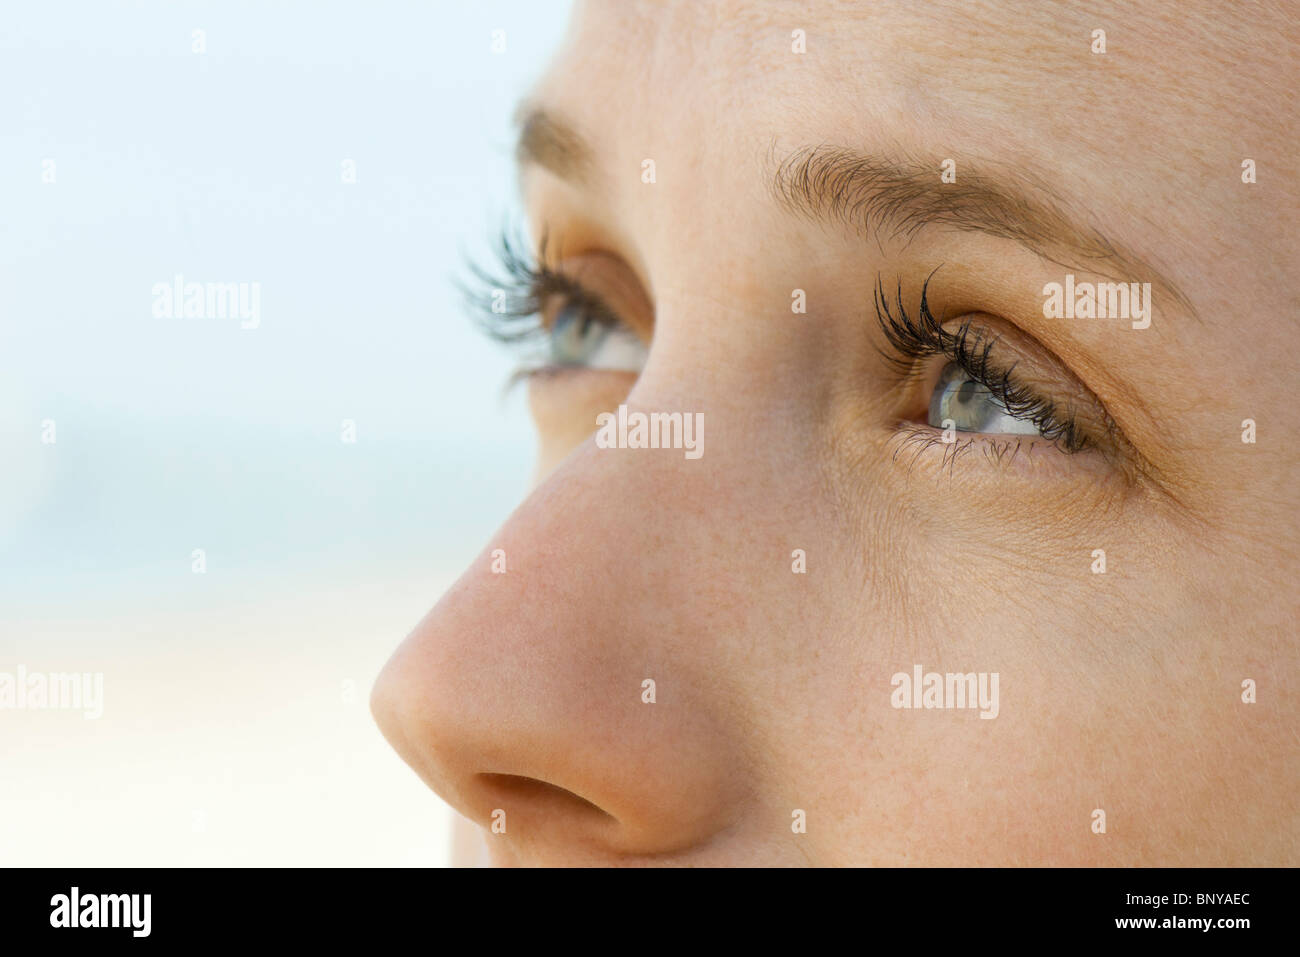 Woman looking up, close-up Stock Photo